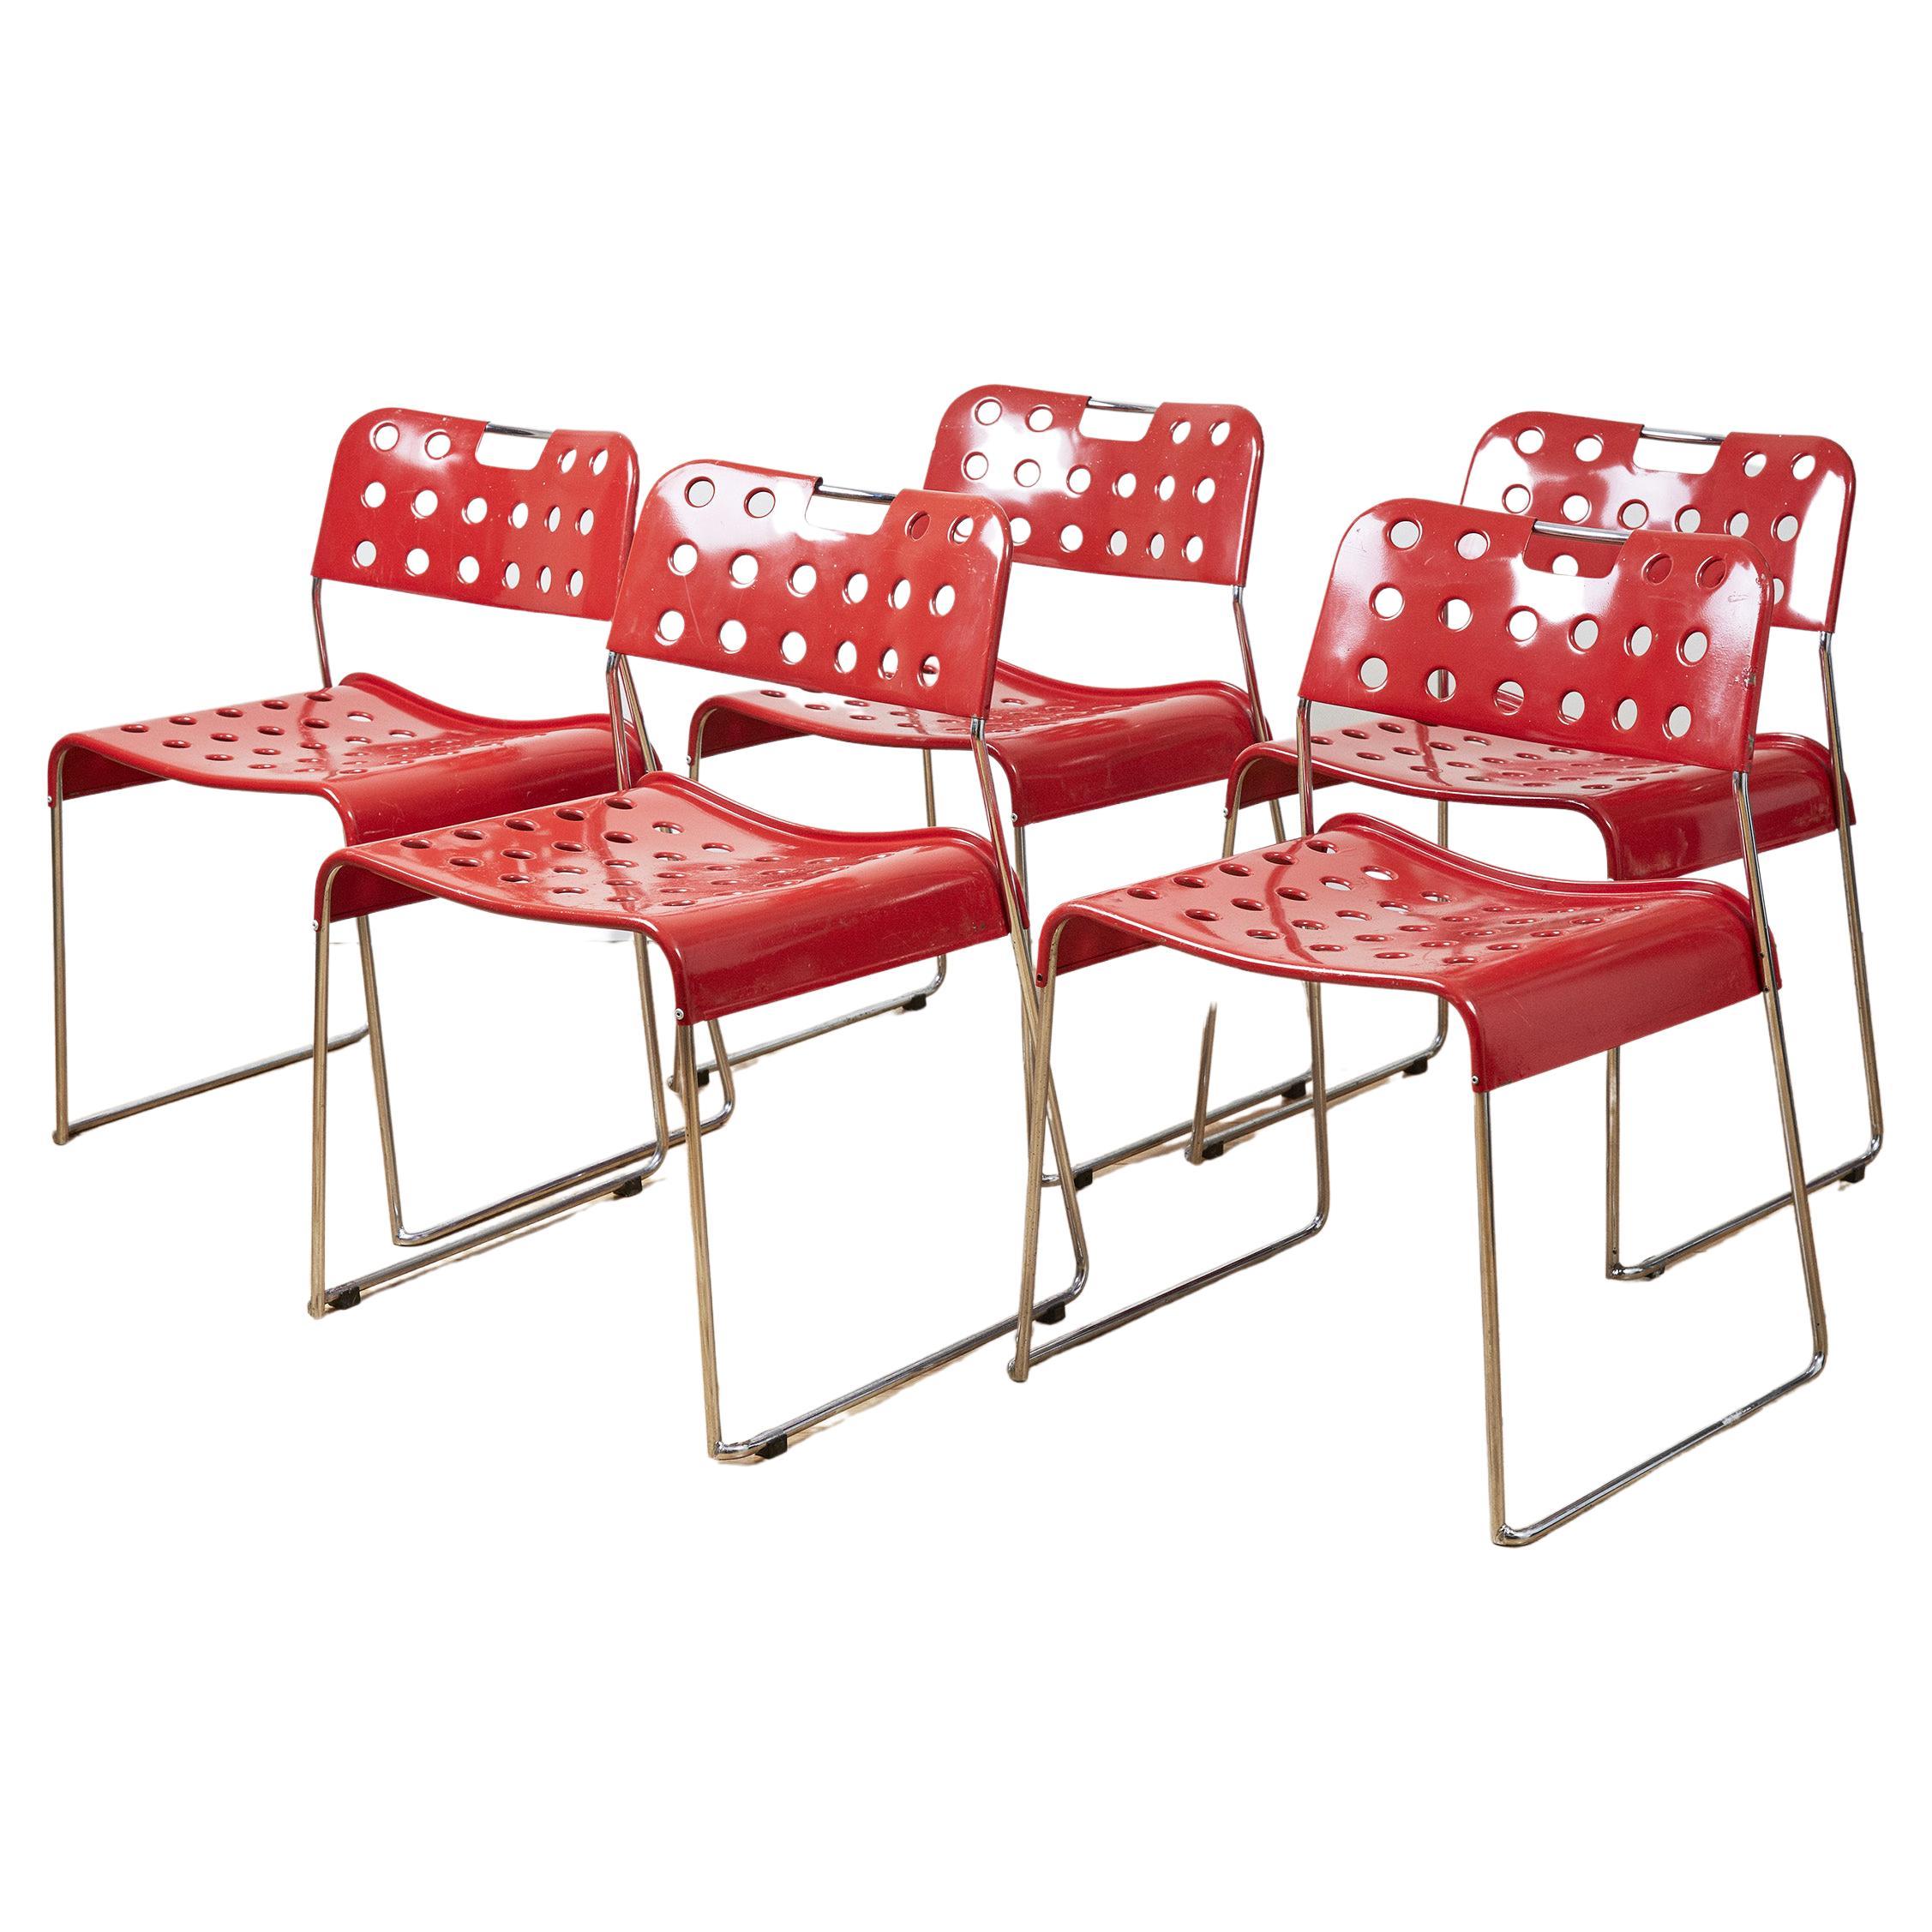 Rodney Kinsman Space Age Red Omstak Dining Chair for Bieffeplast, 1971, Set of 5